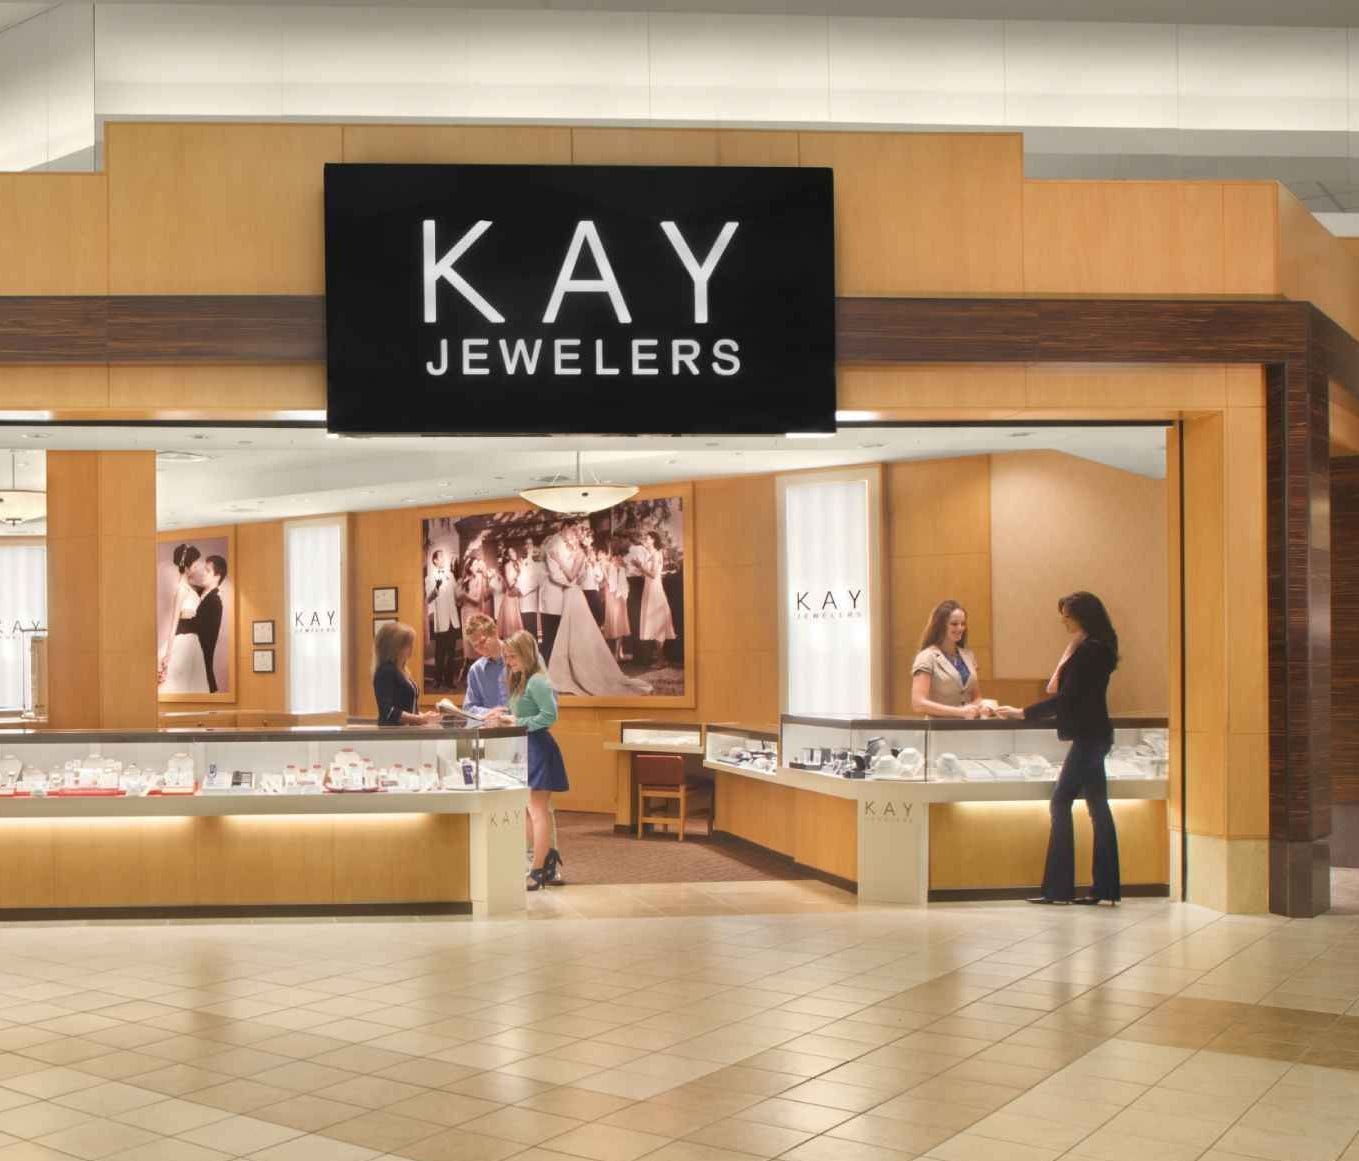 Kay is the largest specialty retail jeweler by sales in the USA. It, along with Zales Jewelers, Peoples Jewelers, Piercing Pagoda and Ernest Jones, are part of the conglomerate Sterling Jewelers.